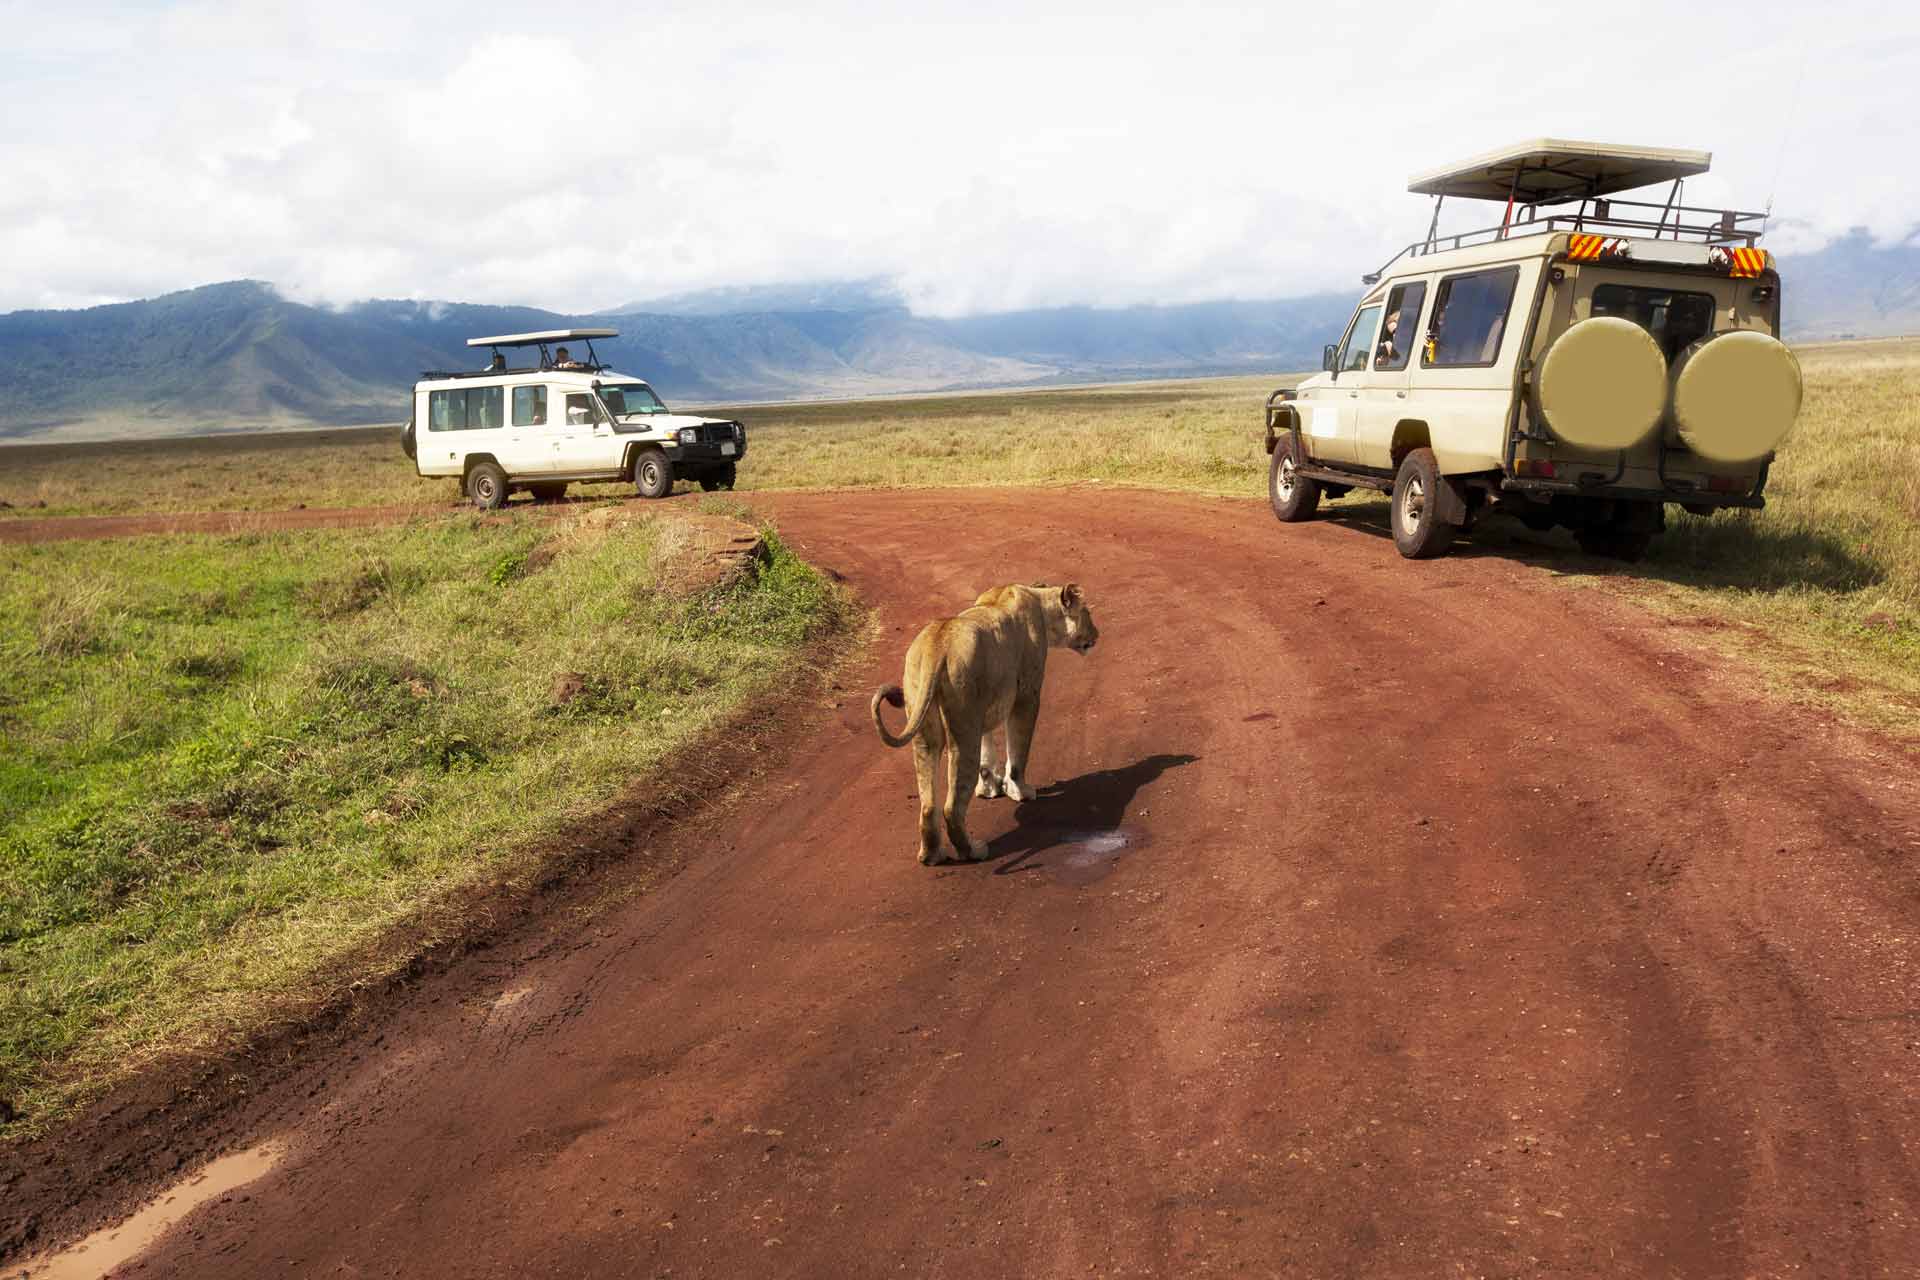 Two safari vehicles are stopped as a lion walks down the road in Ngorongoro Crater in Tanzania